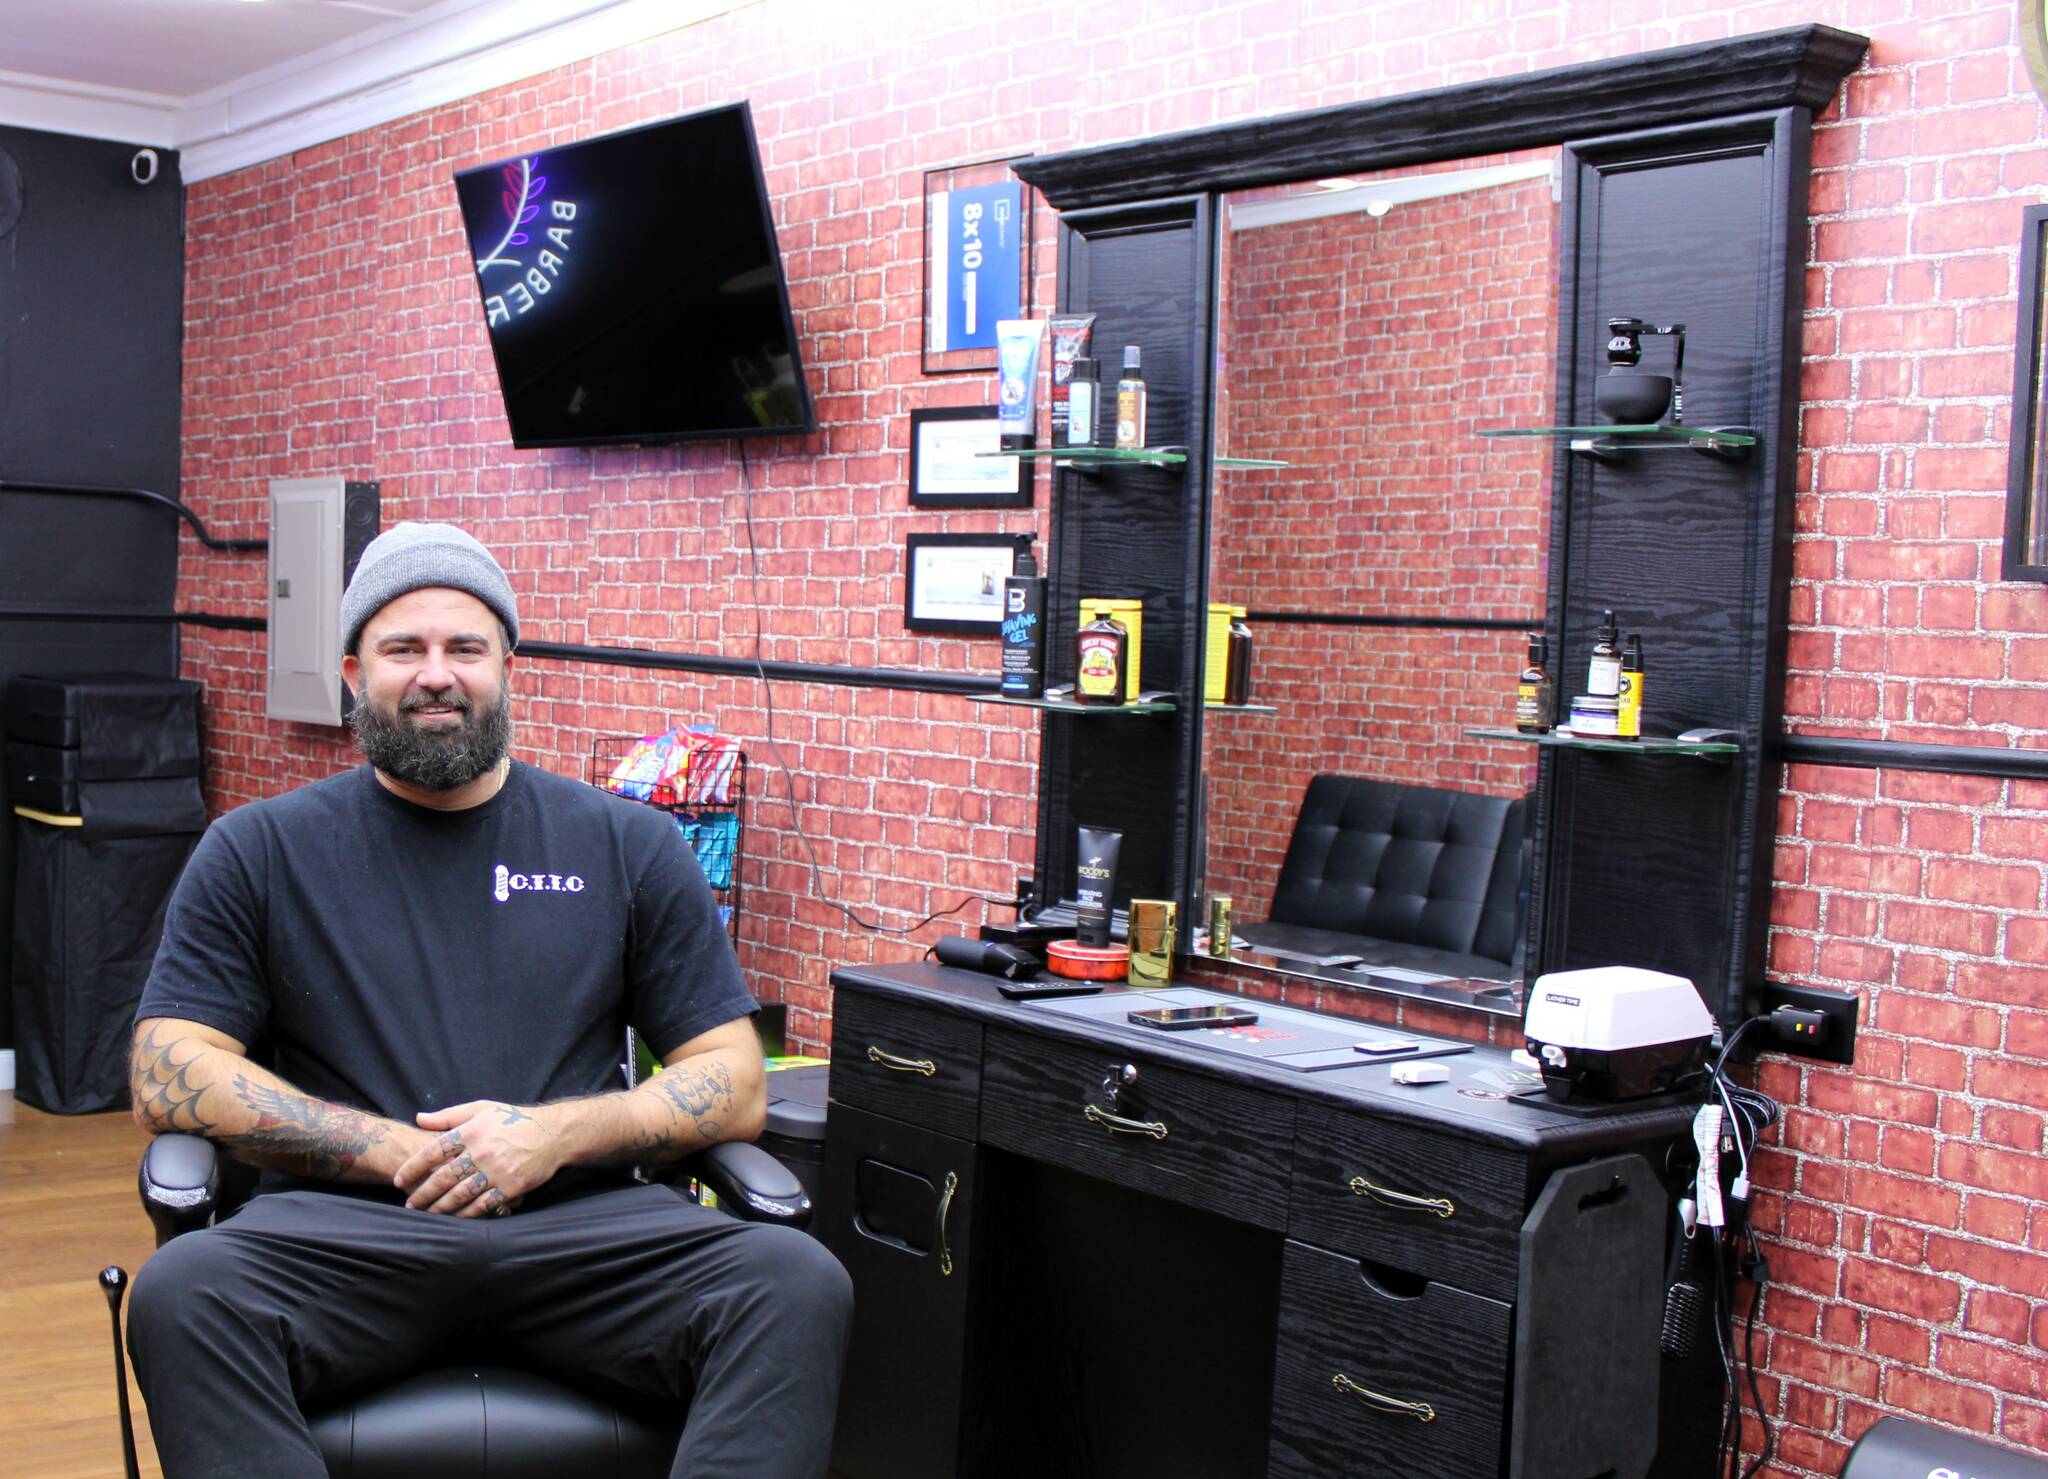 Elisha Meyer/Kitsap News Group
Chase Austin shows off the inside of his new Cut to the Chase barbershop, a place where he hopes to bring the community together through haircuts.